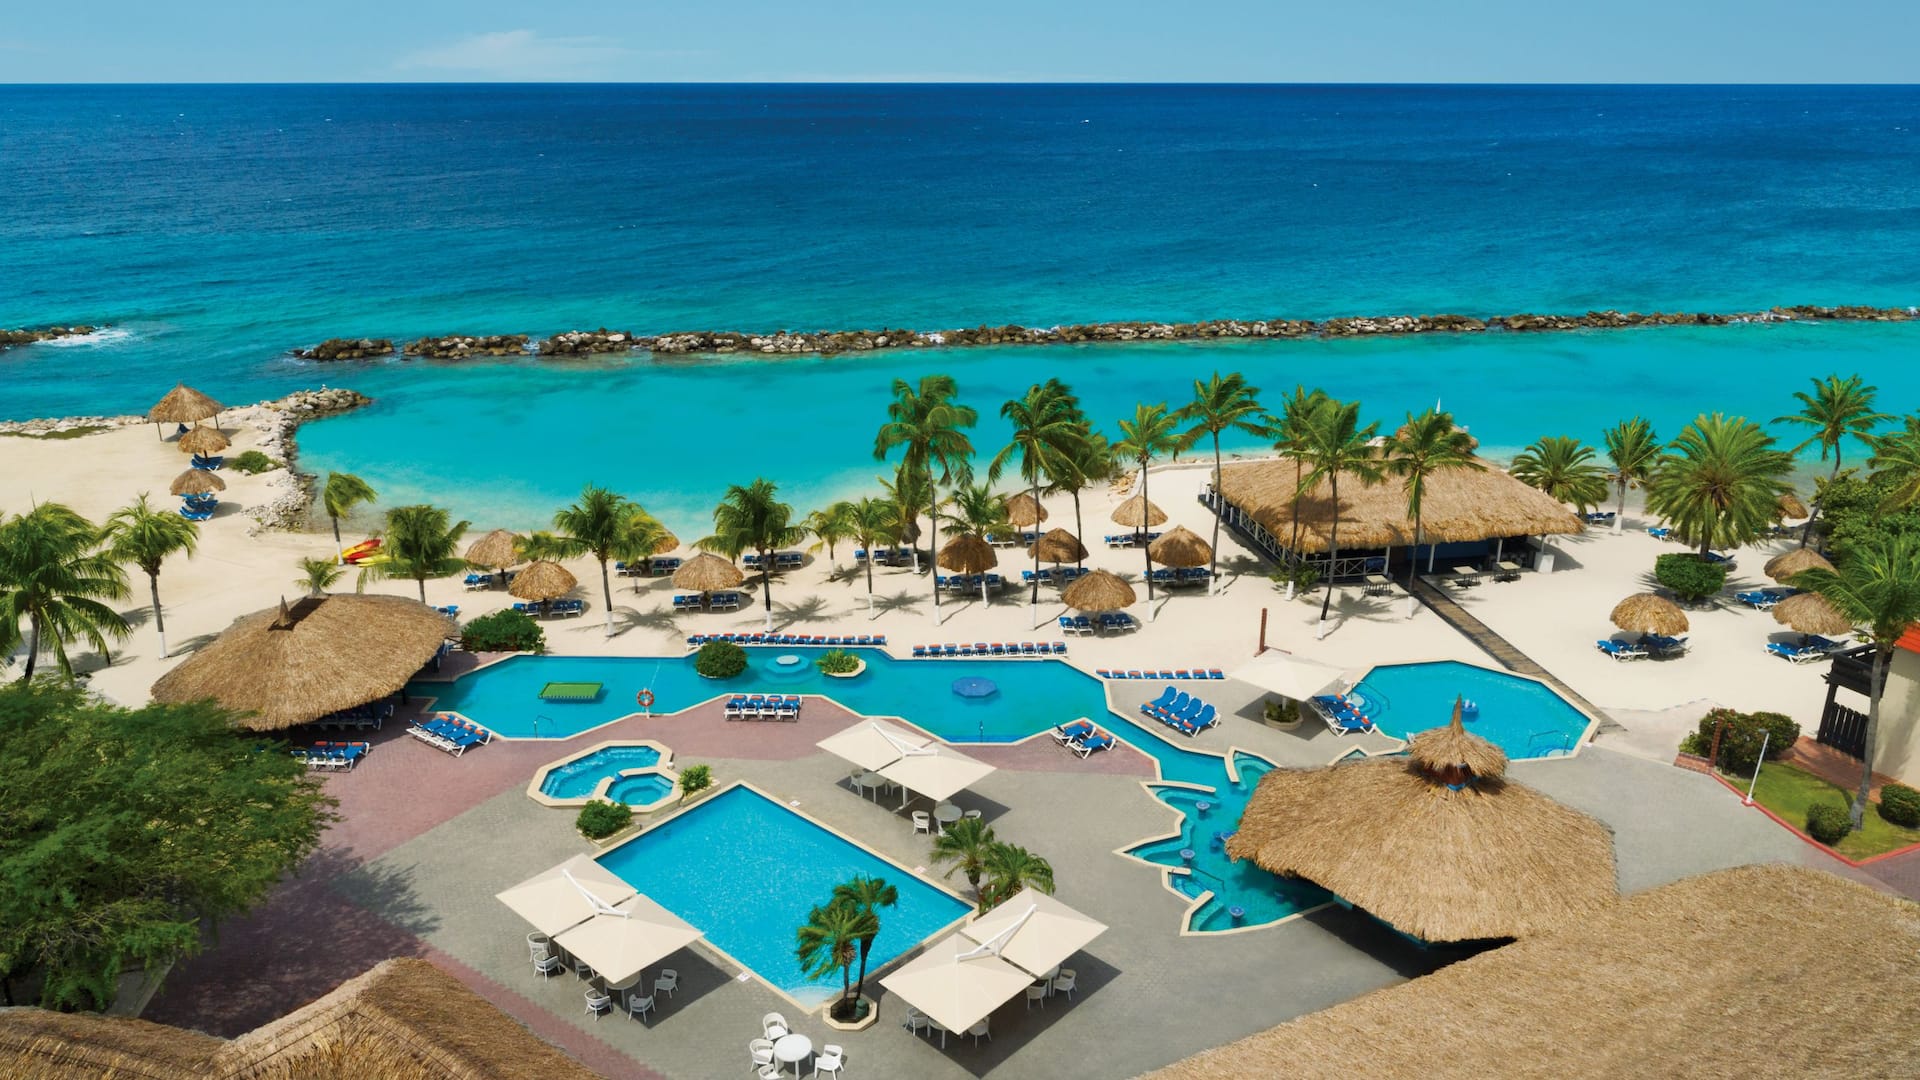 Sunscape Curacao Resort & Spa Aerial View of Pools